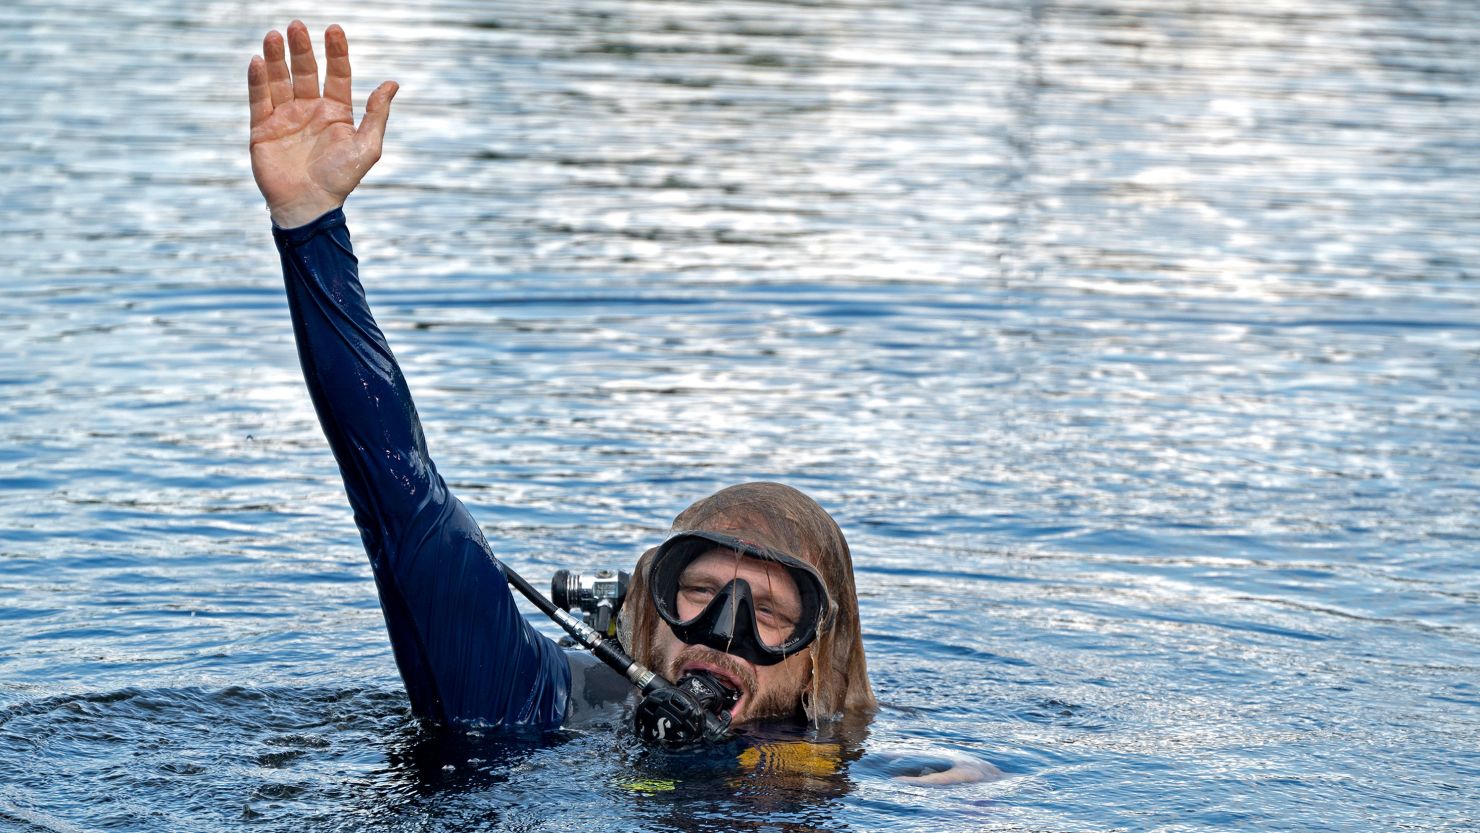  Dr. Joseph Dituri surfaces on June 9 after living for 100 days underwater.